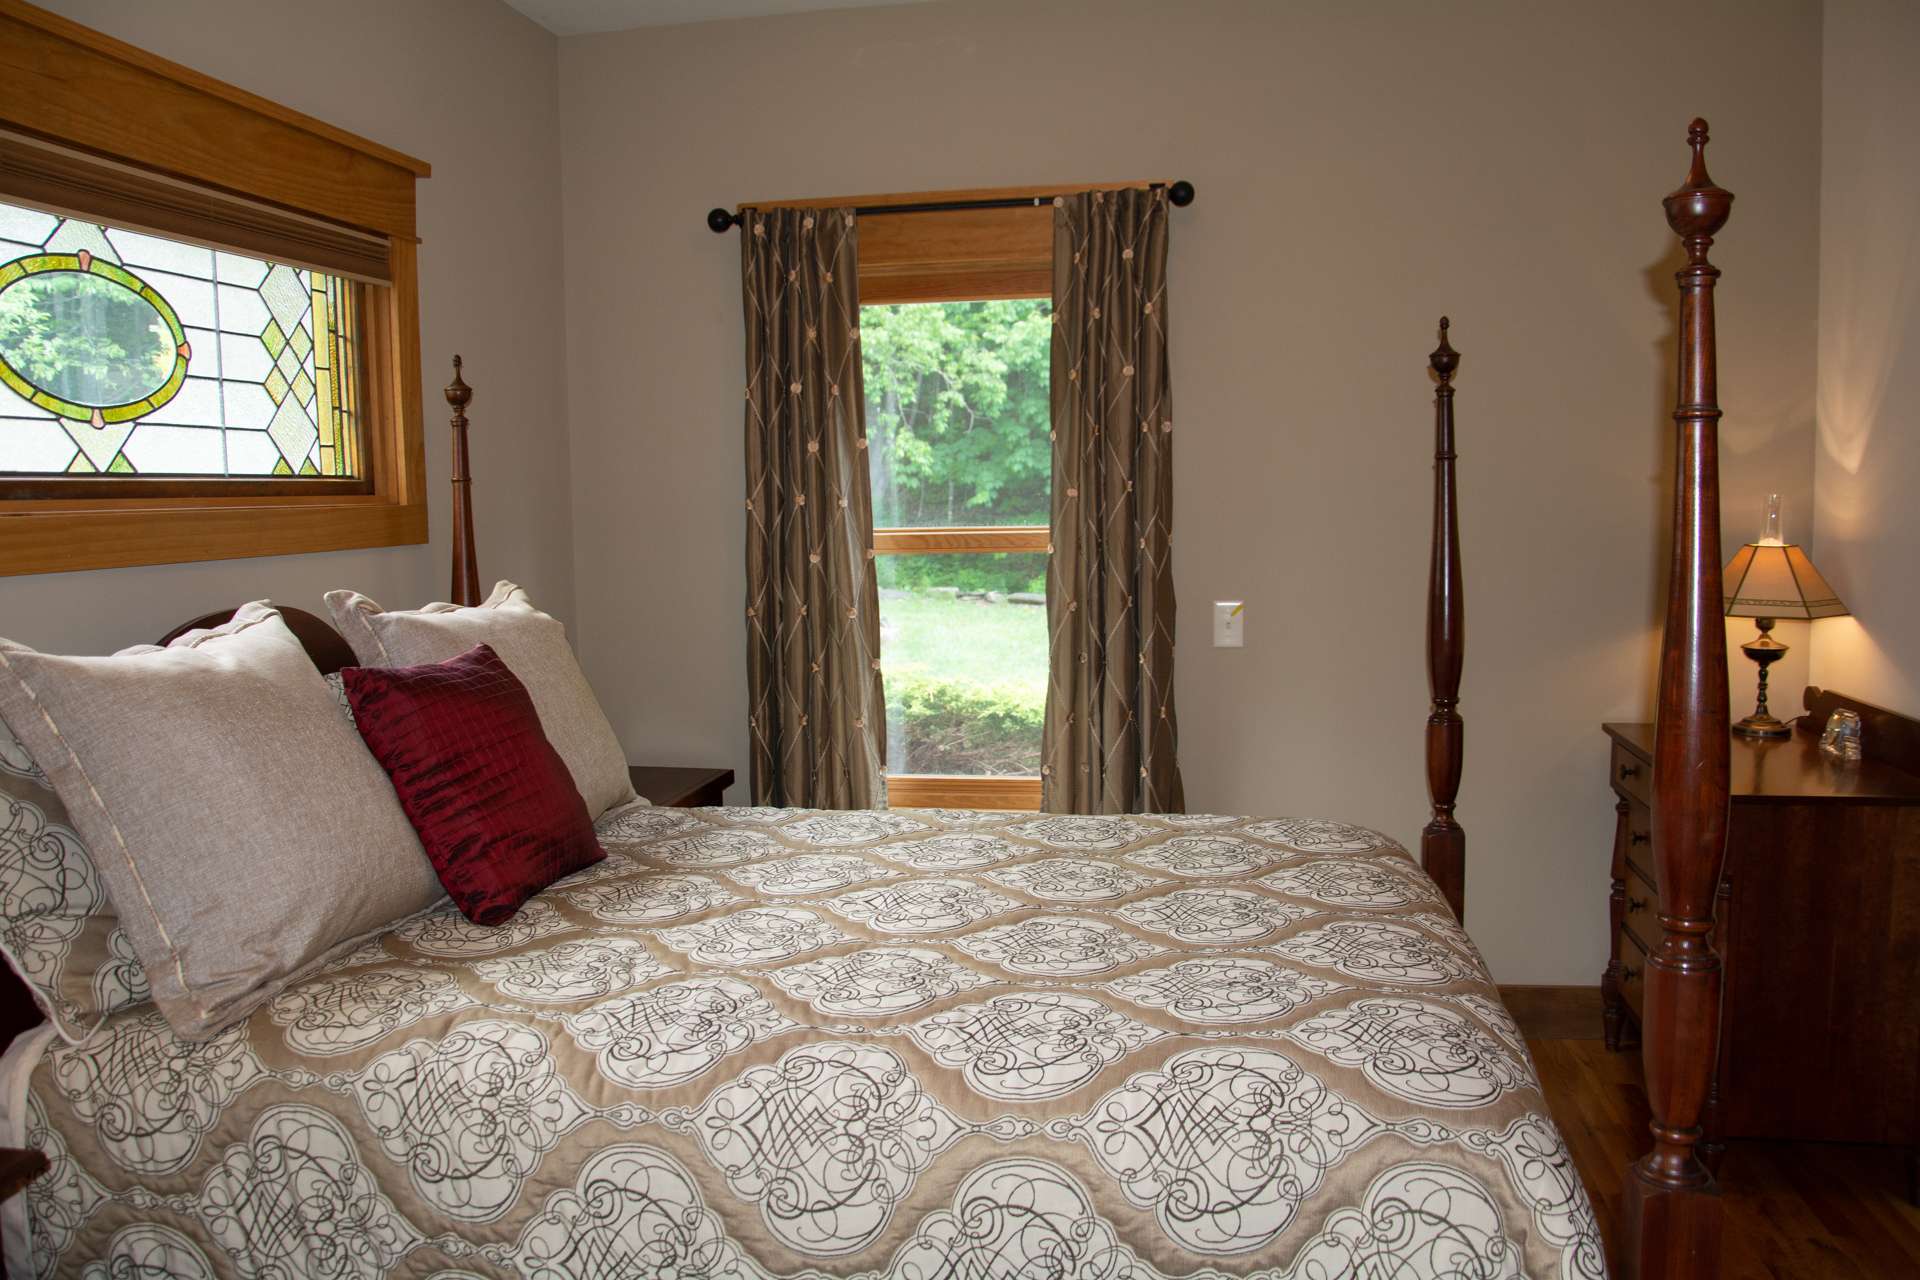 Also located on the main level is a guest bedroom with beautiful stained glass accents and full bath.